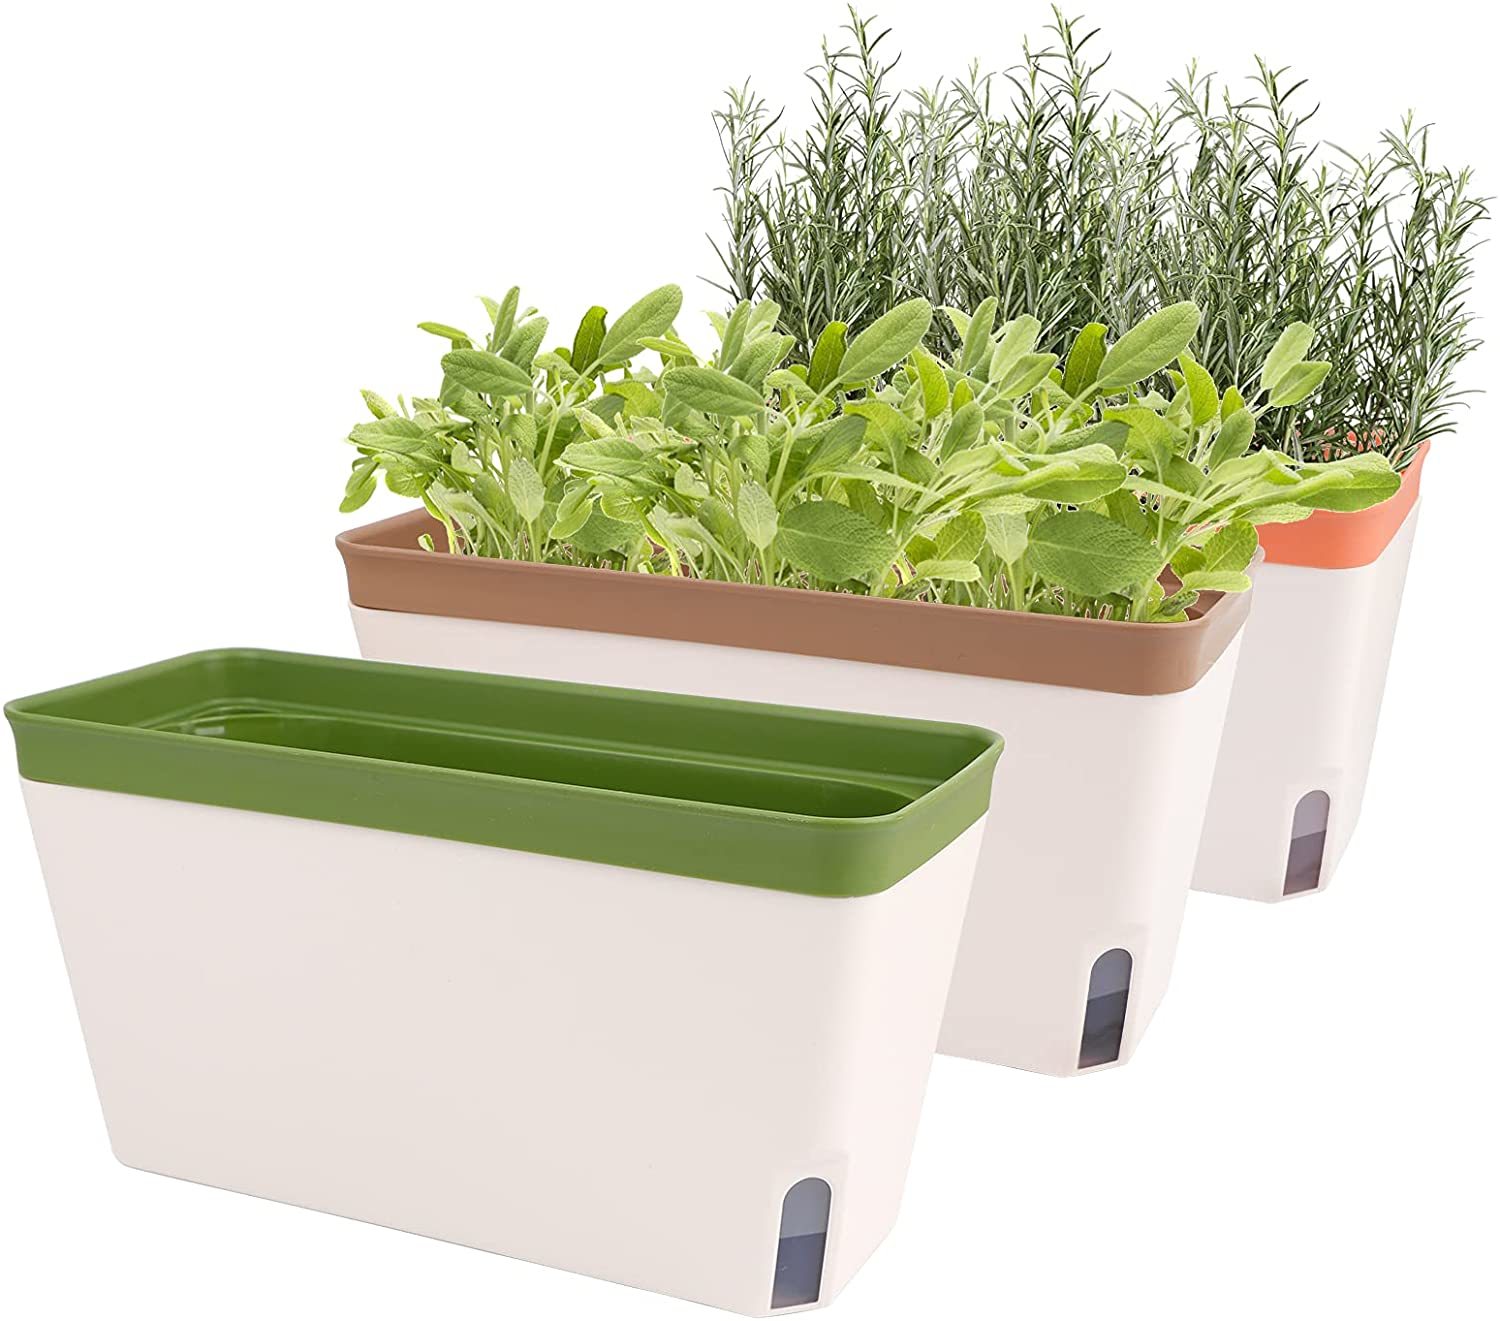 Primary image for OurWarm Windowsill Herb Planter Box Indoor Set of 3, 10.5 Inch Self Watering